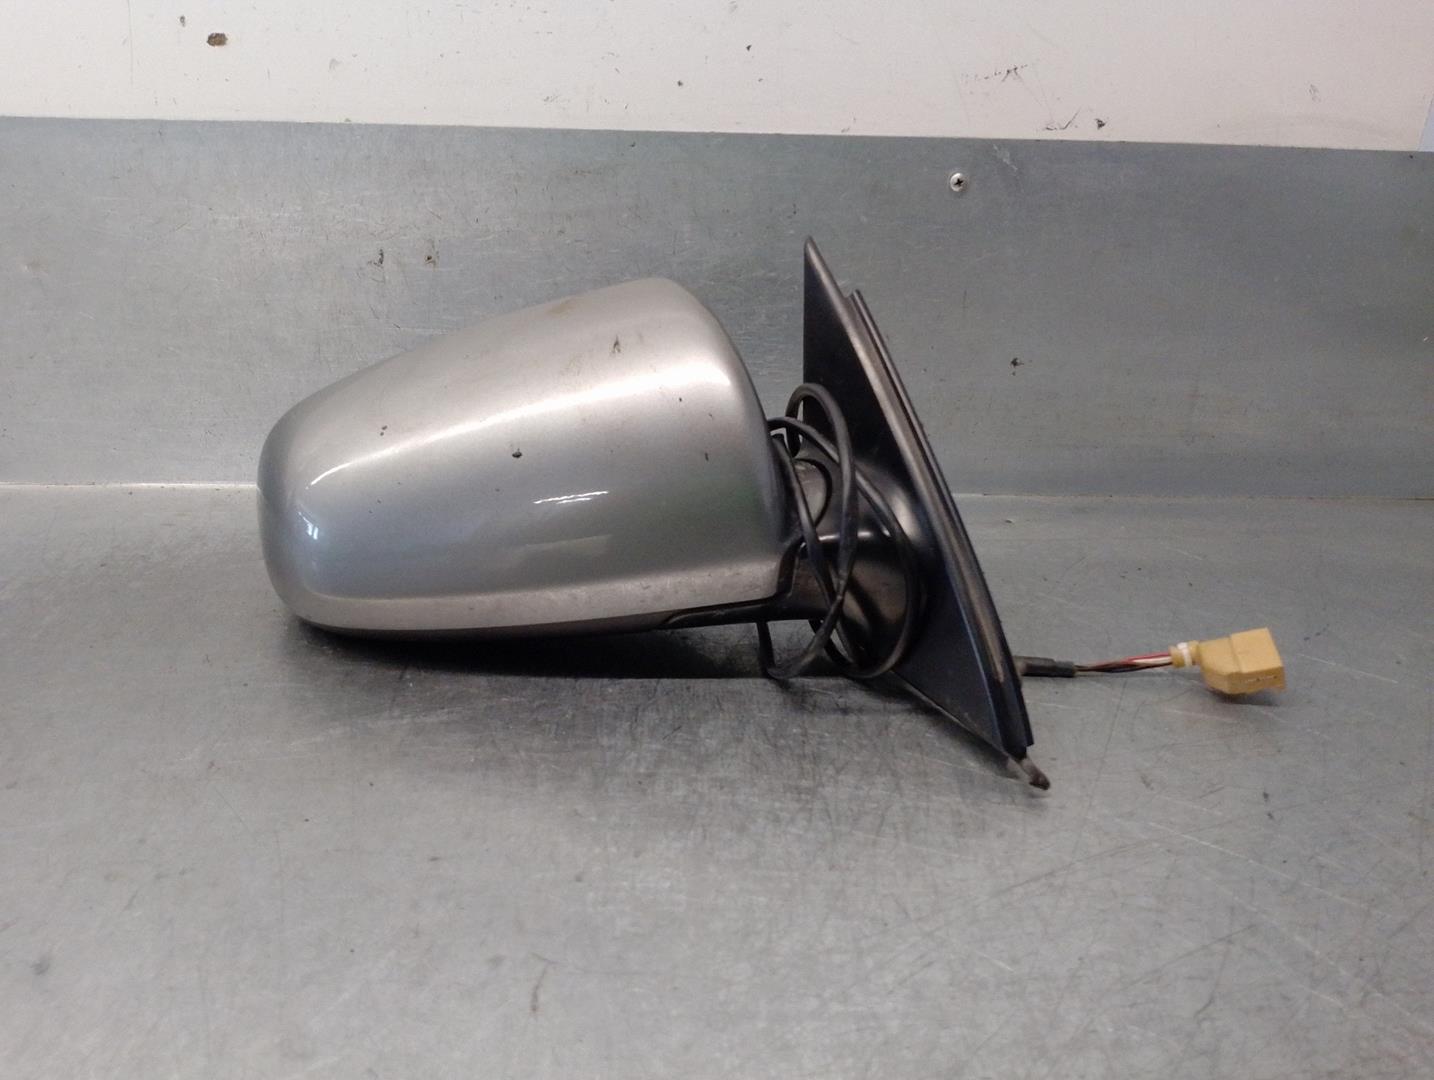 AUDI A4 B6/8E (2000-2005) Right Side Wing Mirror 8E1858532AA01C, 5PINES, 5PUERTAS 20439738